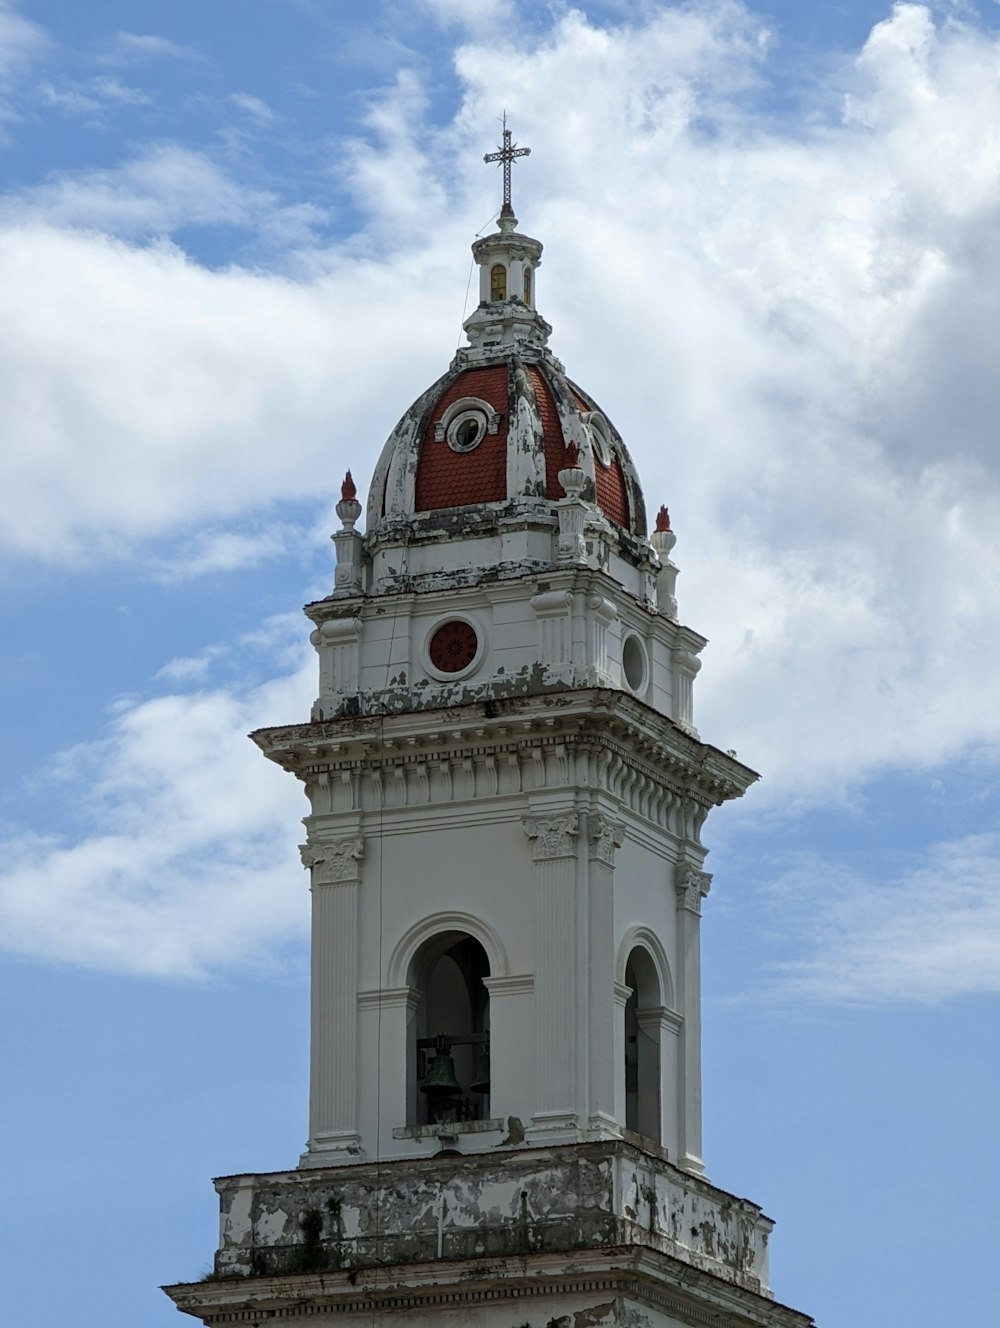 a large white clock tower with a red dome